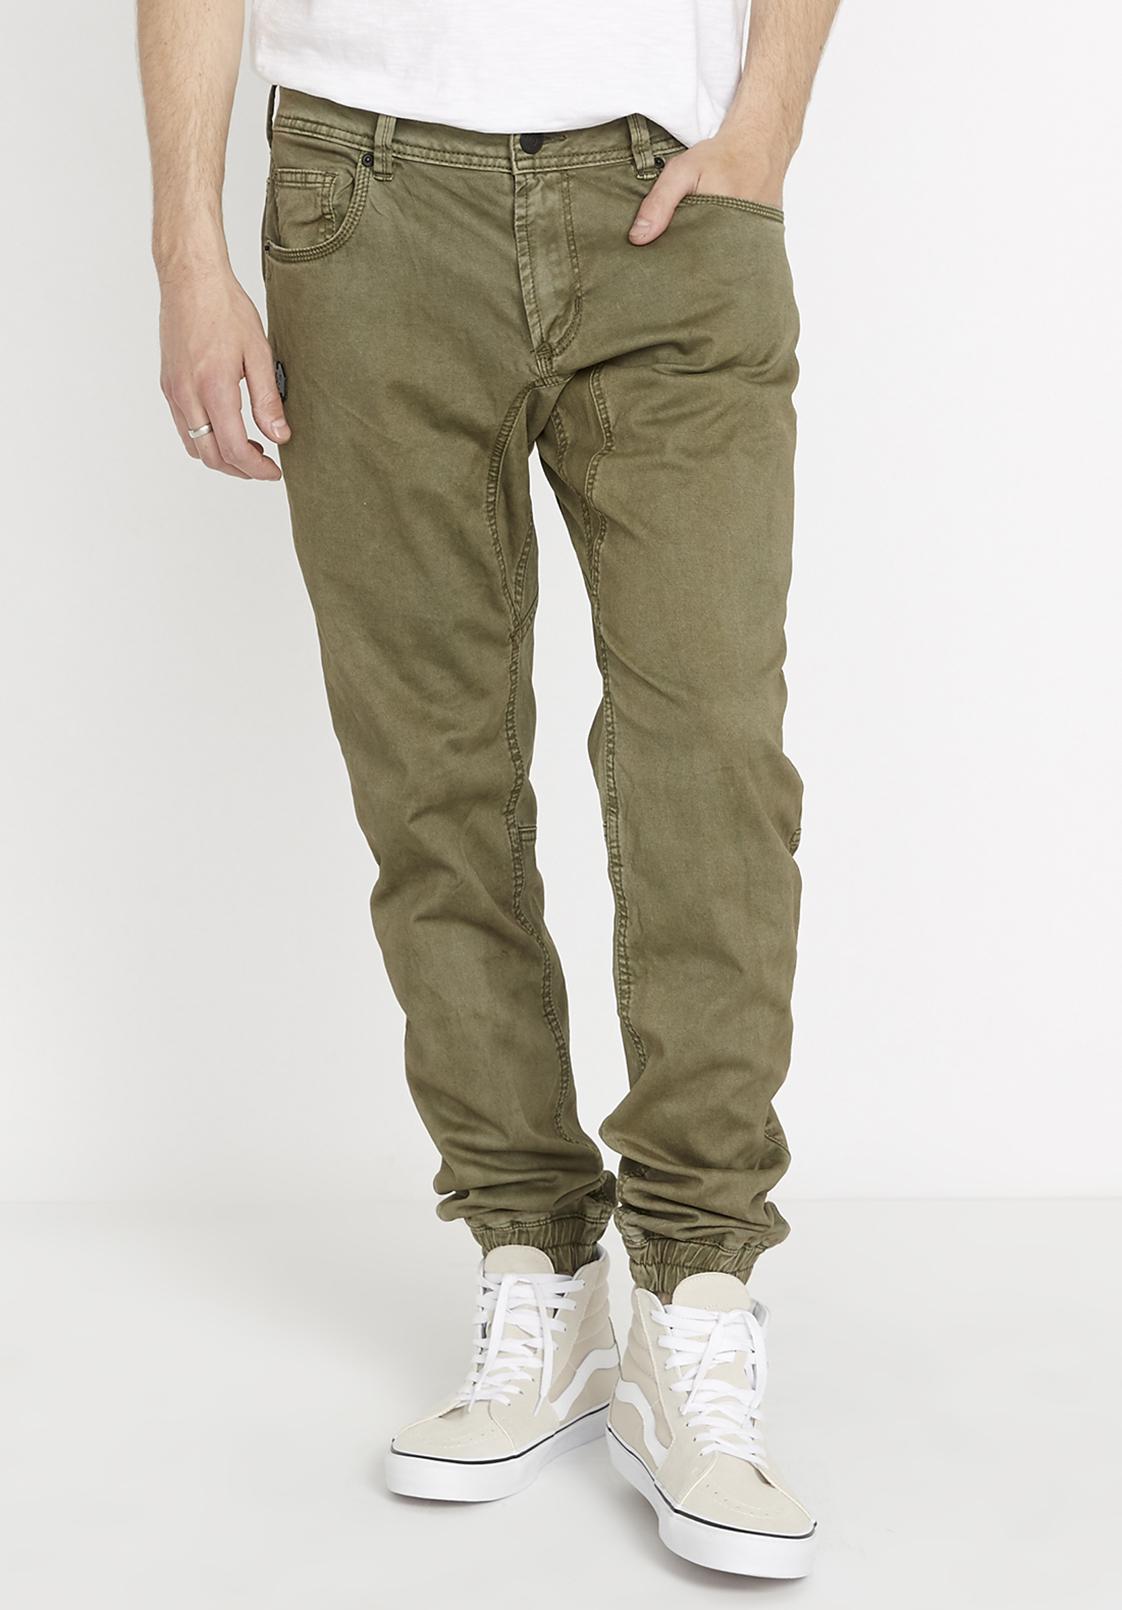 Buffalo Evan Stretch Twill Pant  Mens Pants in Colorful and Bleached Com   Buckle